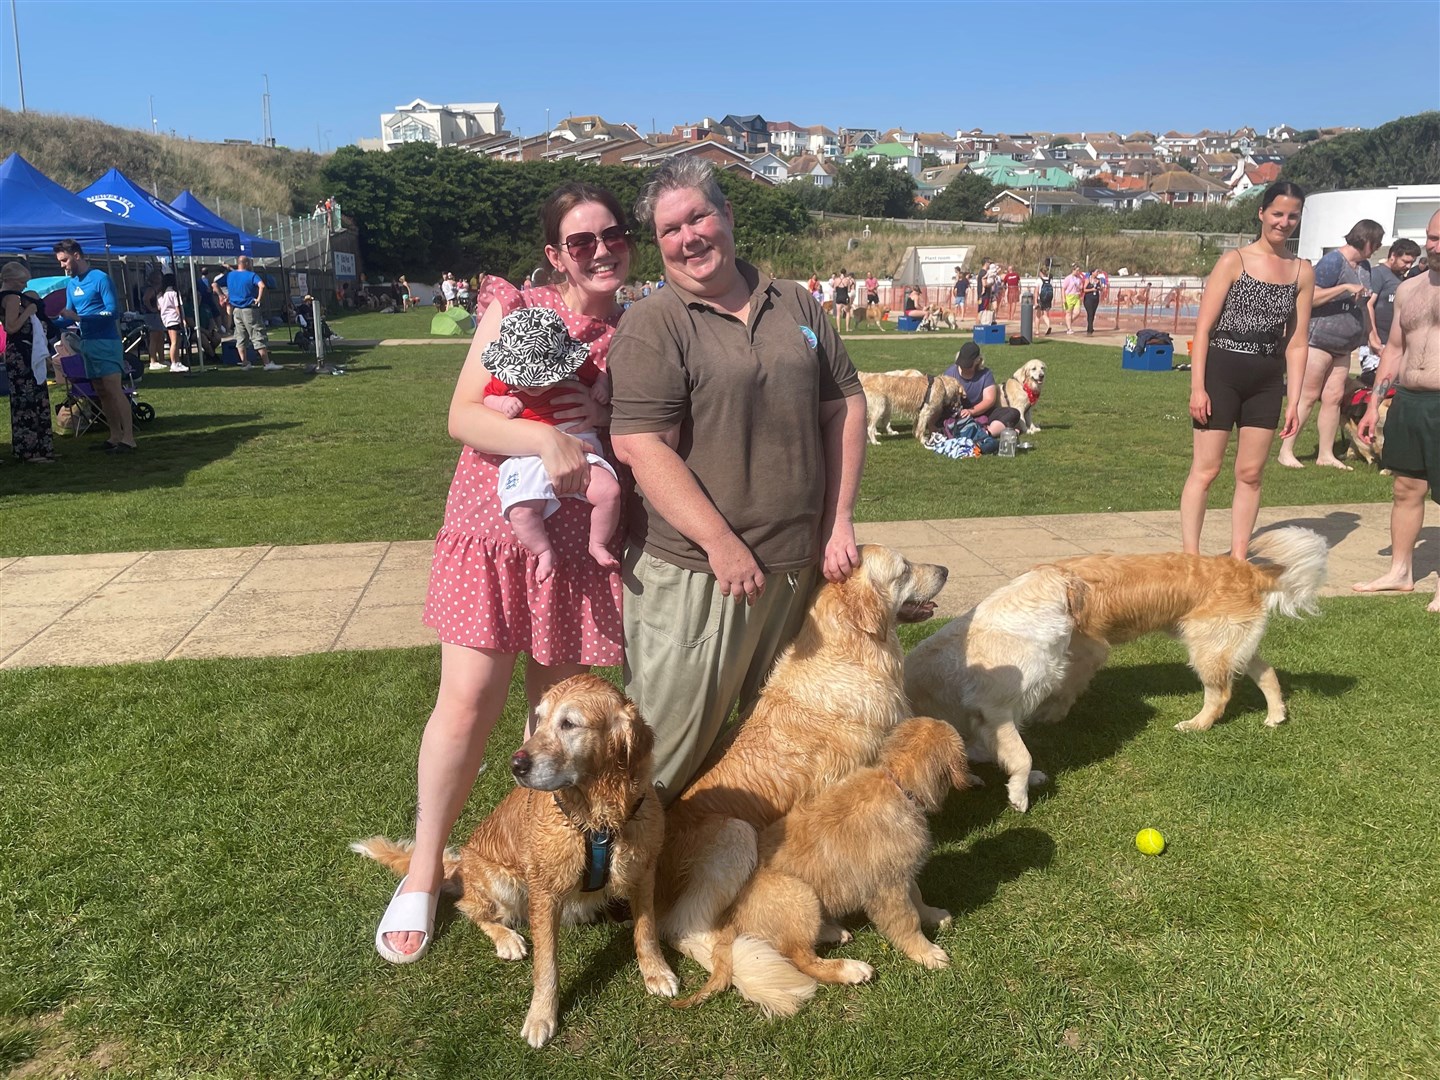 Kent and Sussex Golden Retriever club founders Millie Goad and Donna Sherlock brought their group of golden retrievers (Anahita Hossein-Pour/PA)